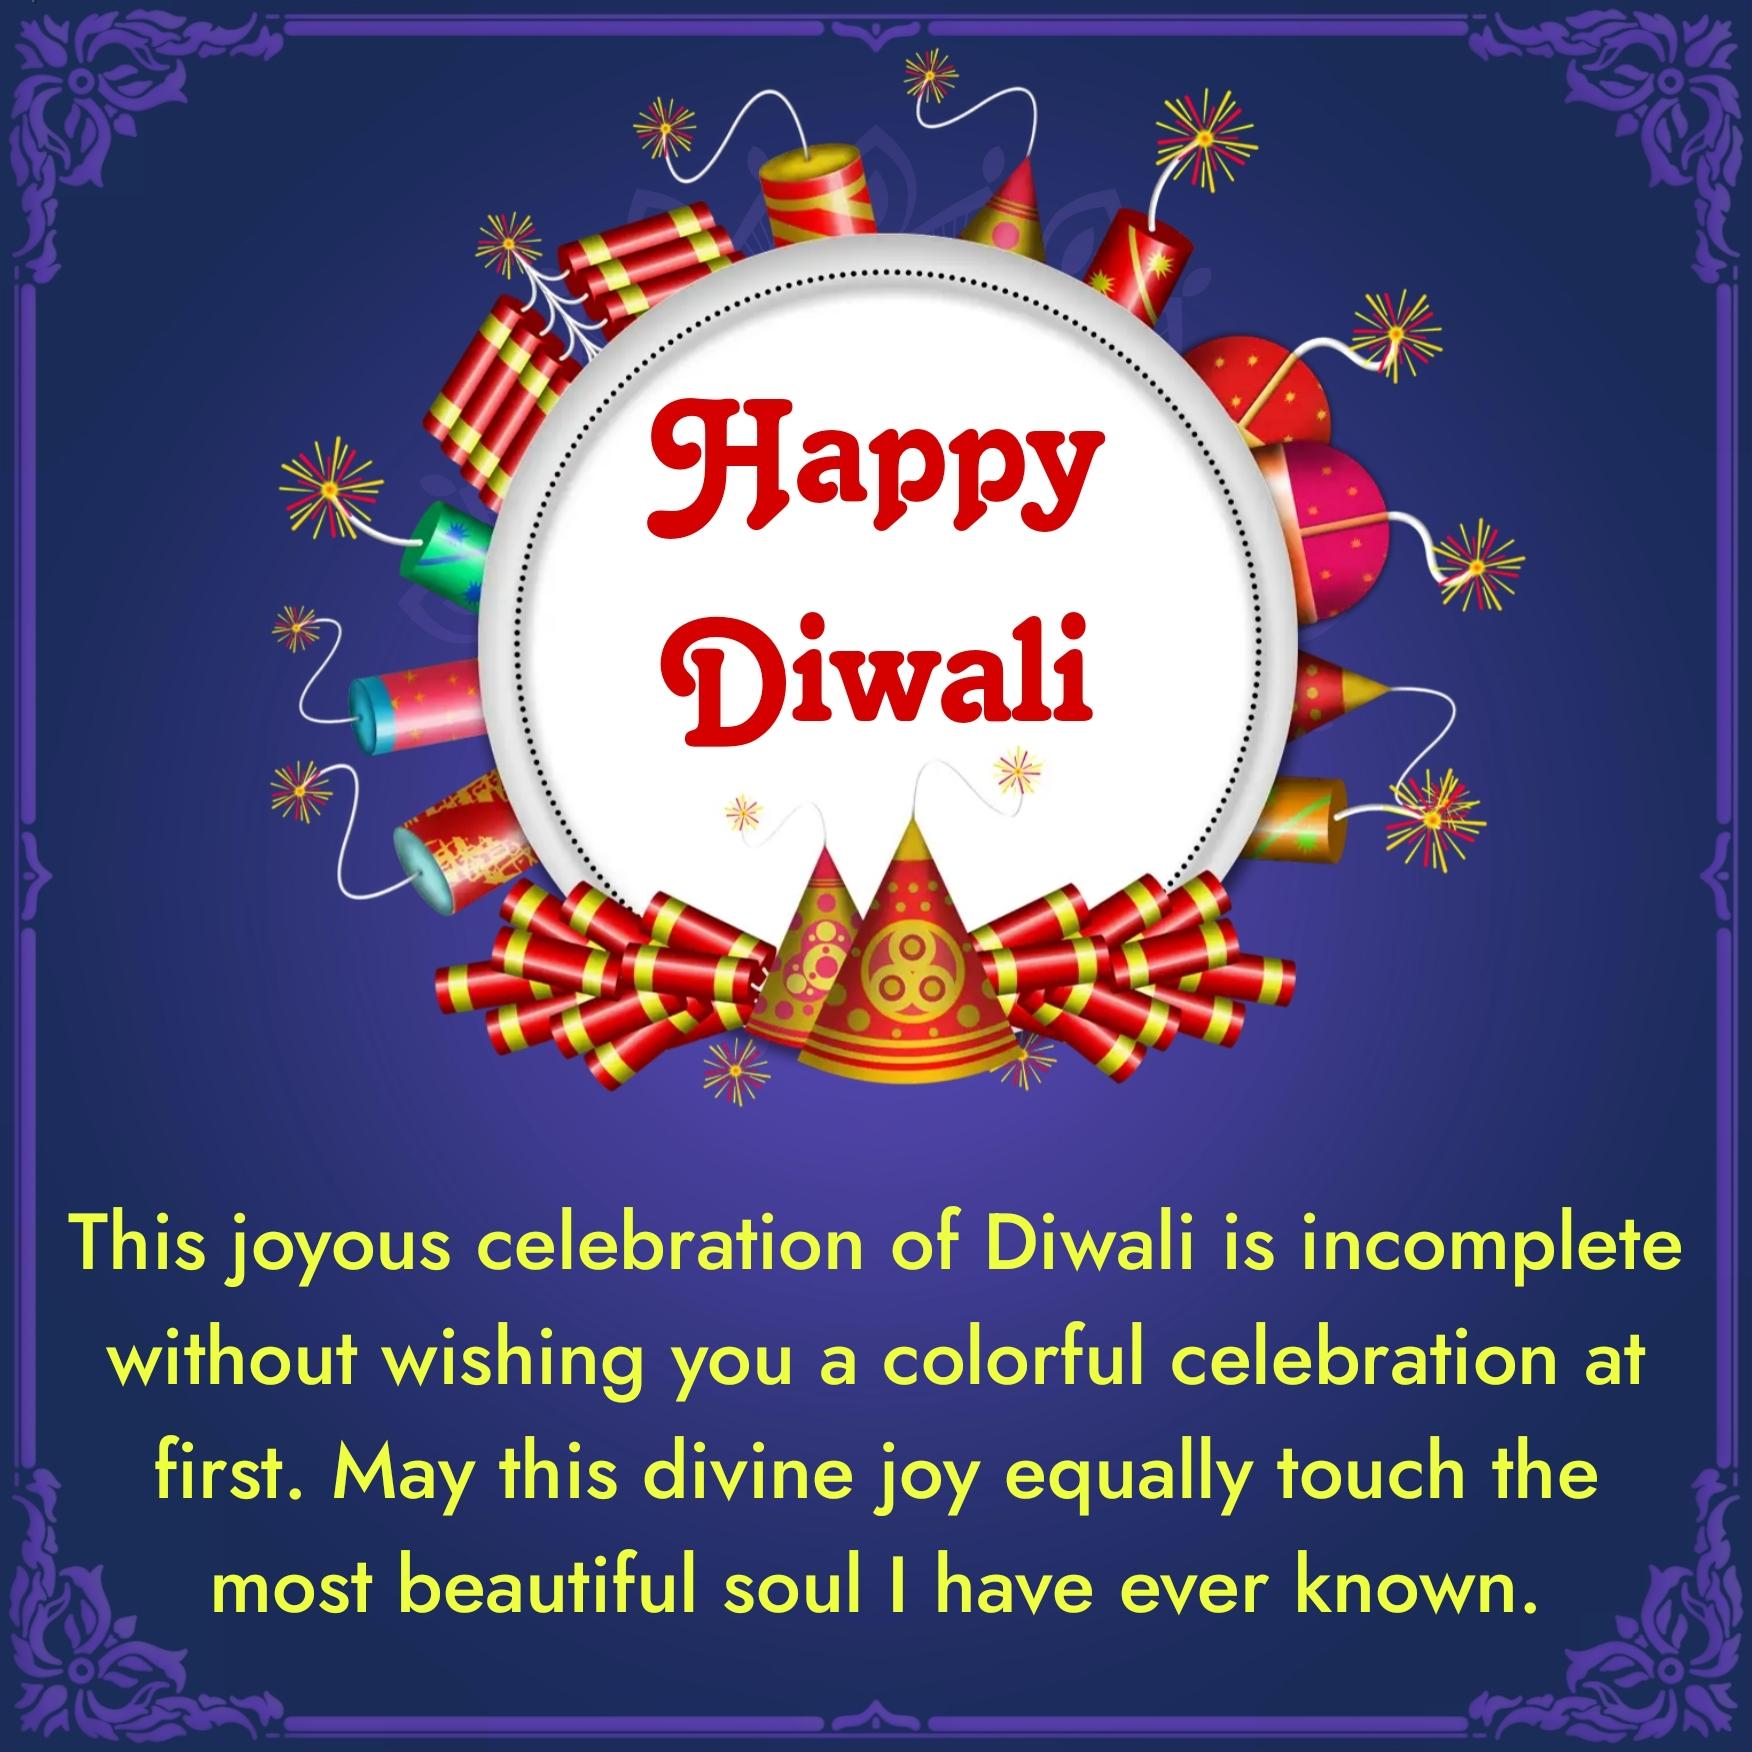 This joyous celebration of Diwali is incomplete without wishing you